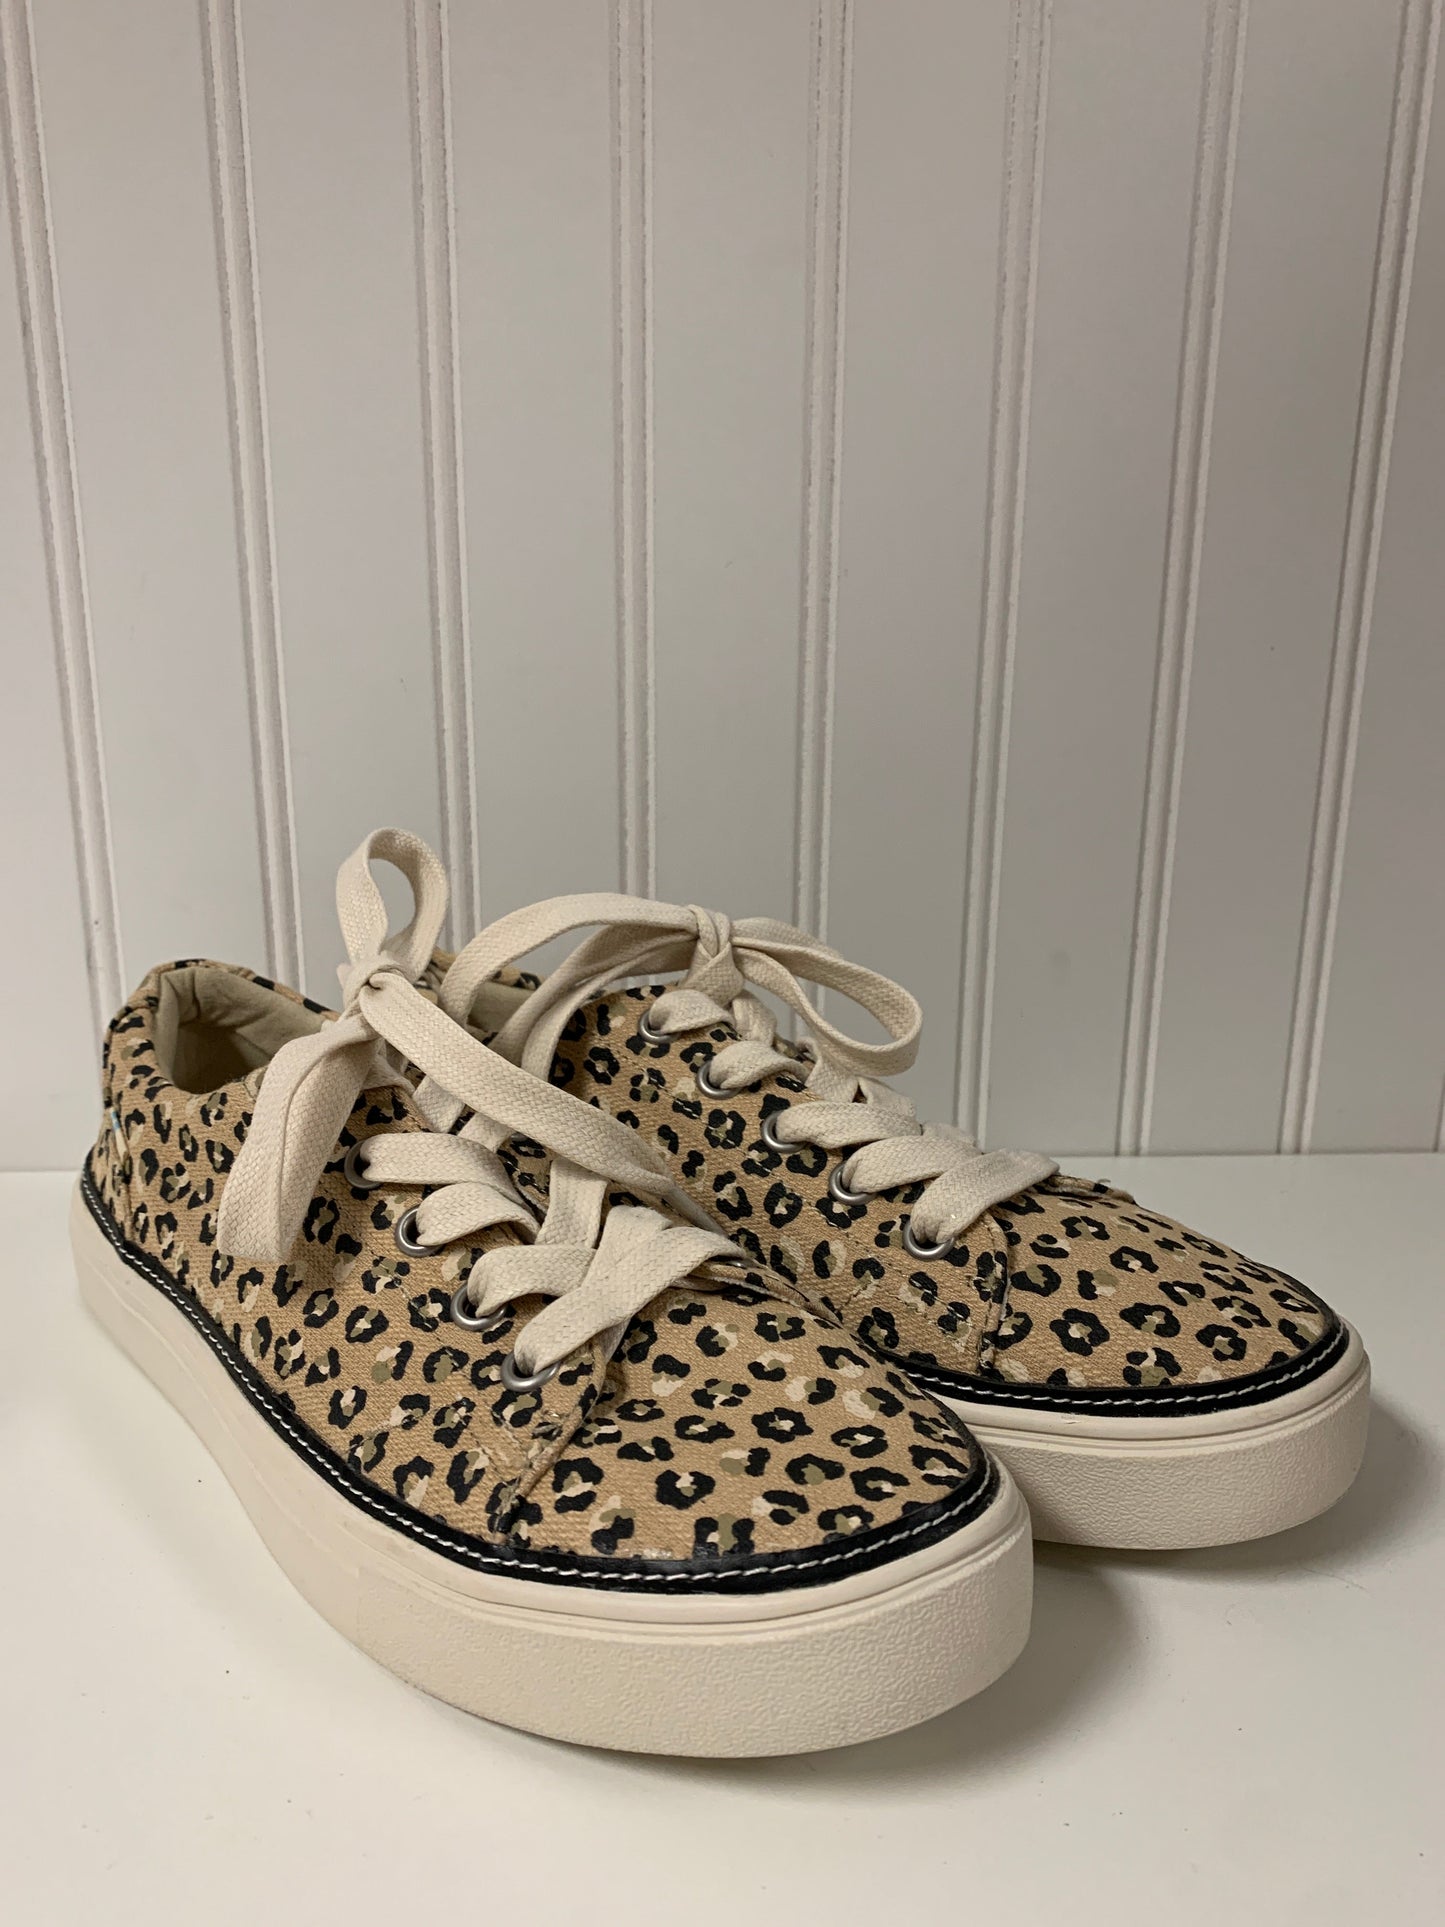 Animal Print Shoes Sneakers Toms, Size 8